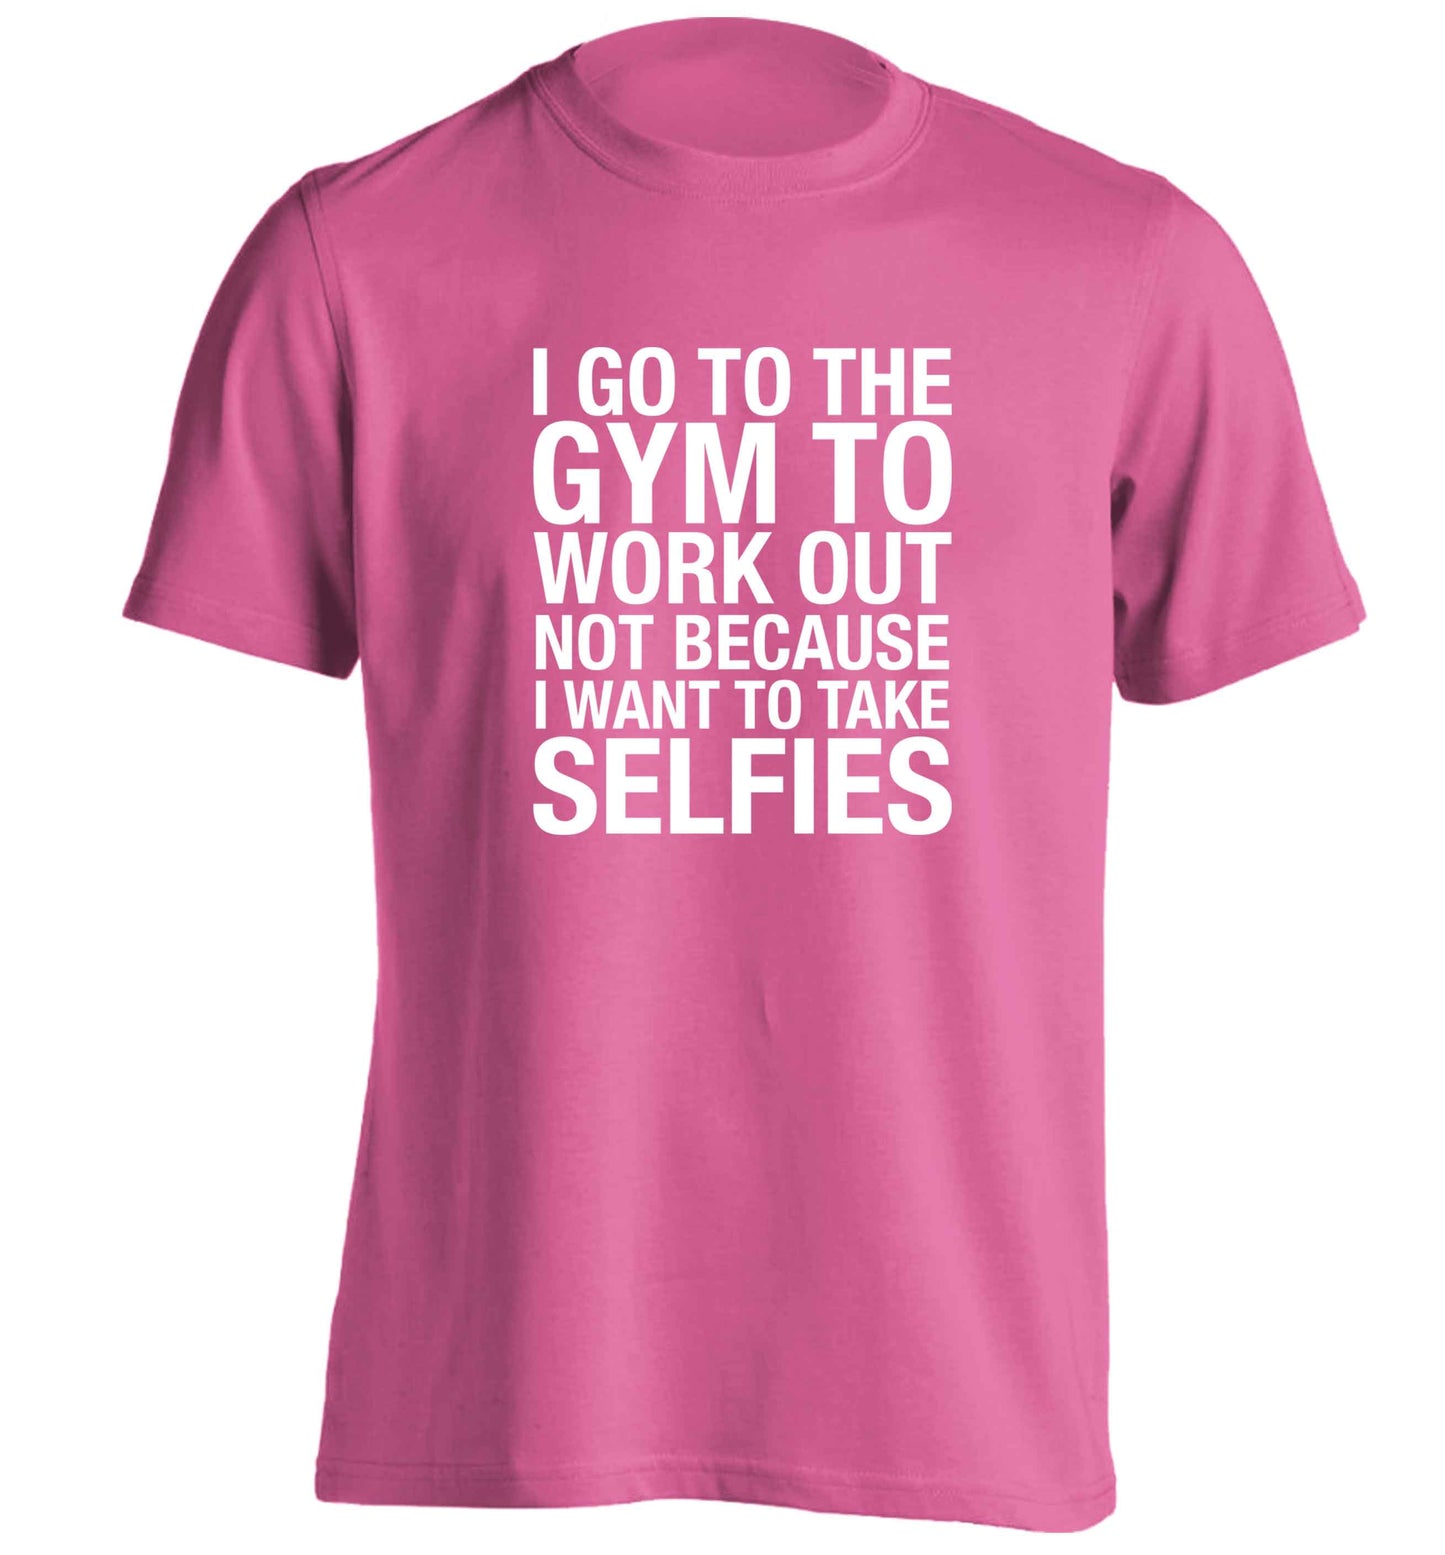 I go to the gym to workout not to take selfies adults unisex pink Tshirt 2XL